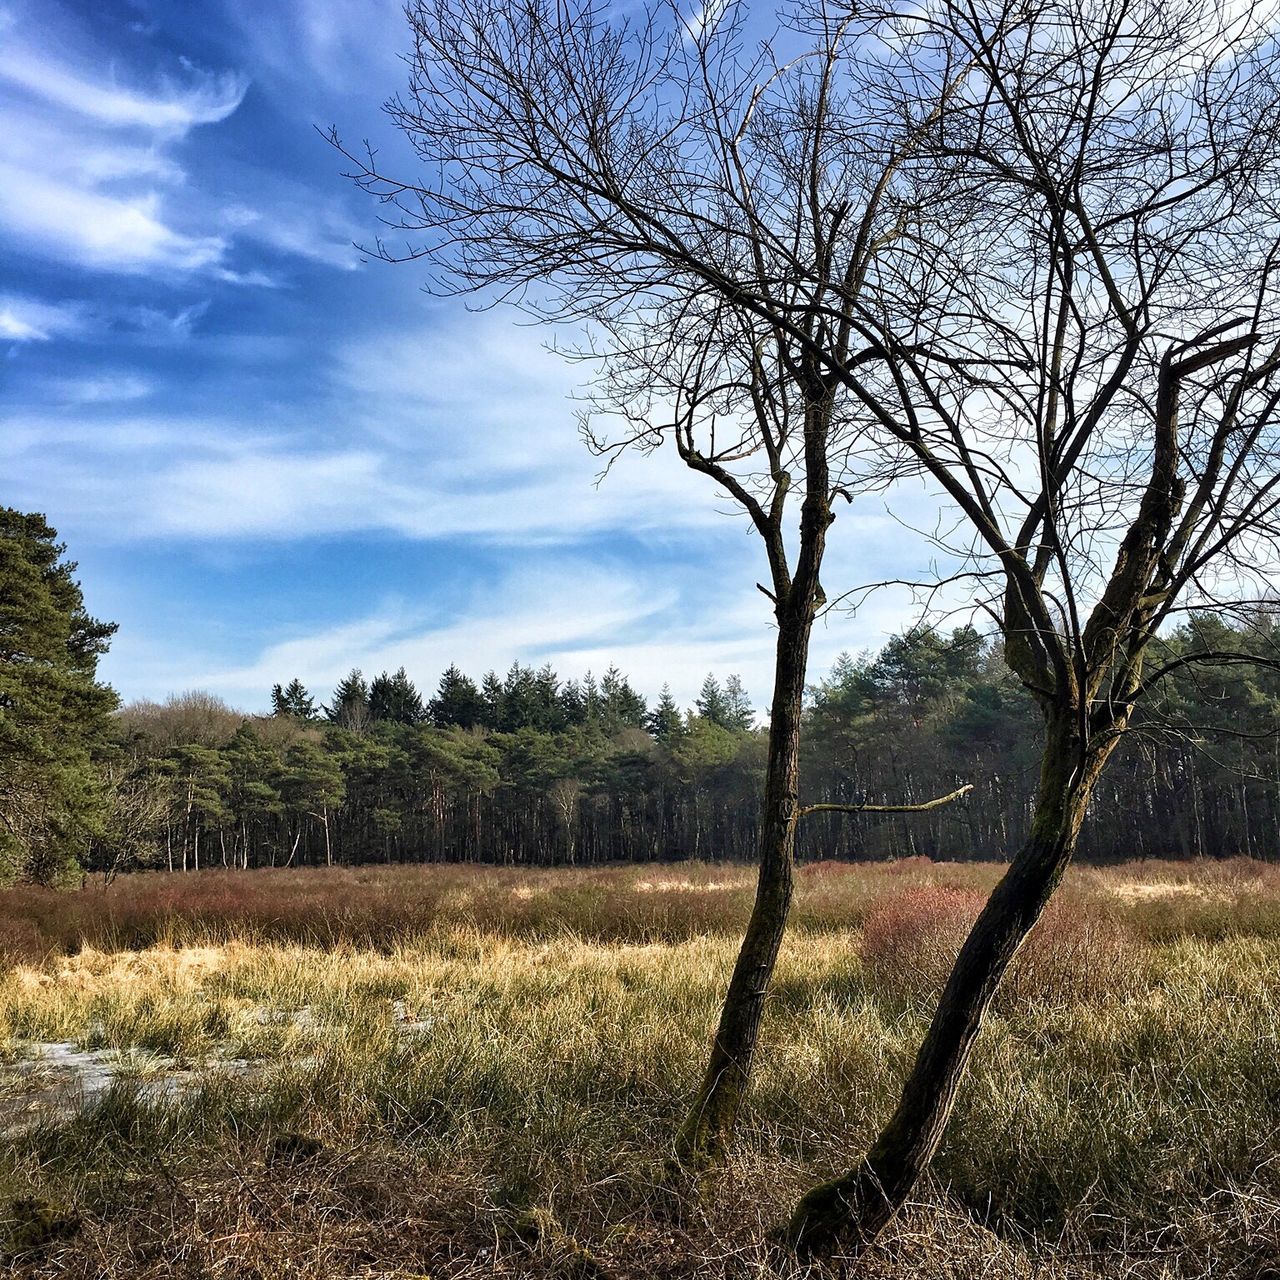 tree, landscape, bare tree, sky, nature, tranquility, field, beauty in nature, no people, tranquil scene, branch, day, forest, outdoors, scenics, growth, grass, desolate